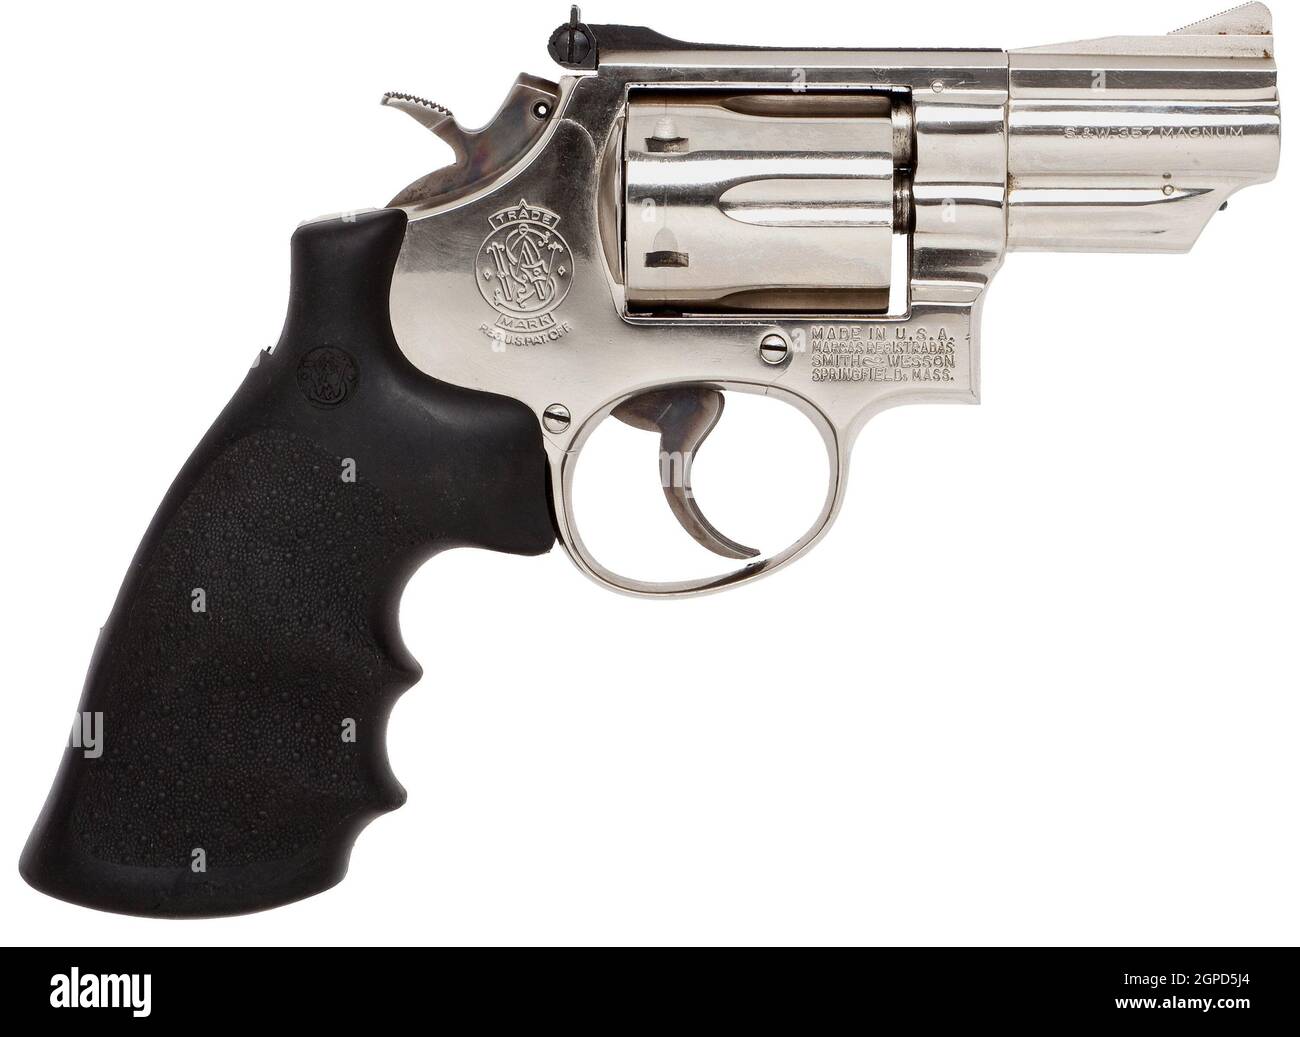 Smith & Wesson Model 19-3 Double Action Revolver Stock Photo